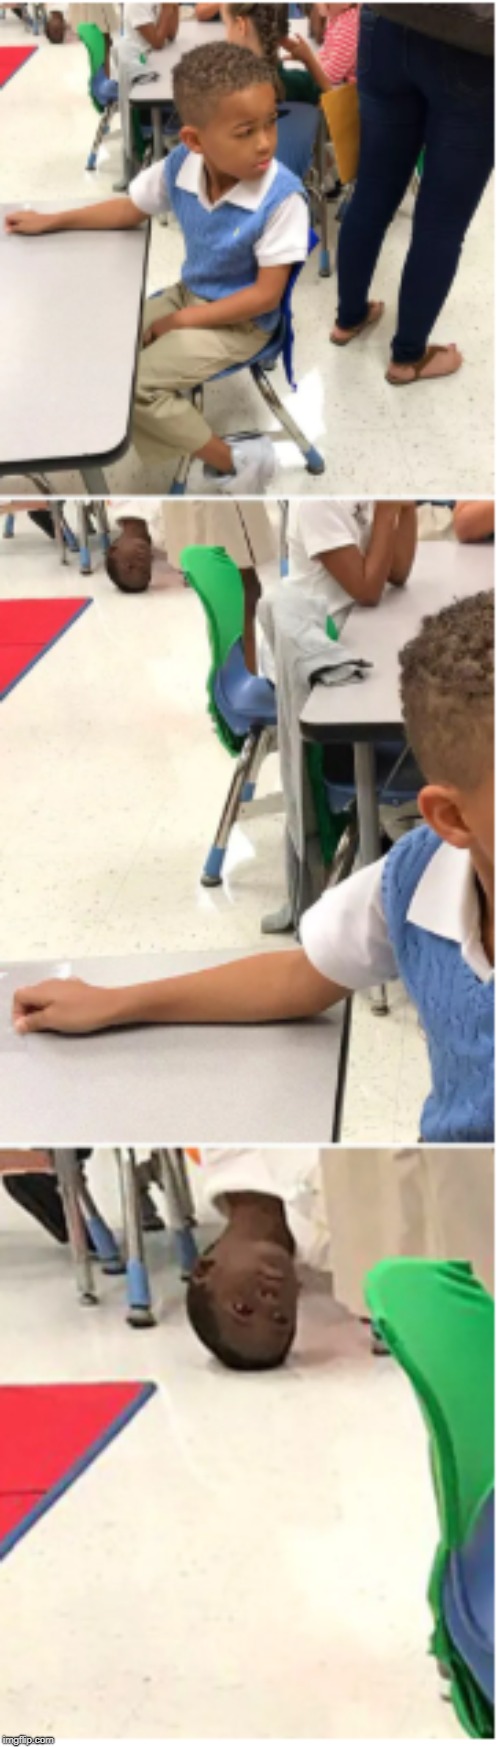 Classroom Kid | image tagged in upside-down,upskirting,student,classroom,standing on head | made w/ Imgflip meme maker